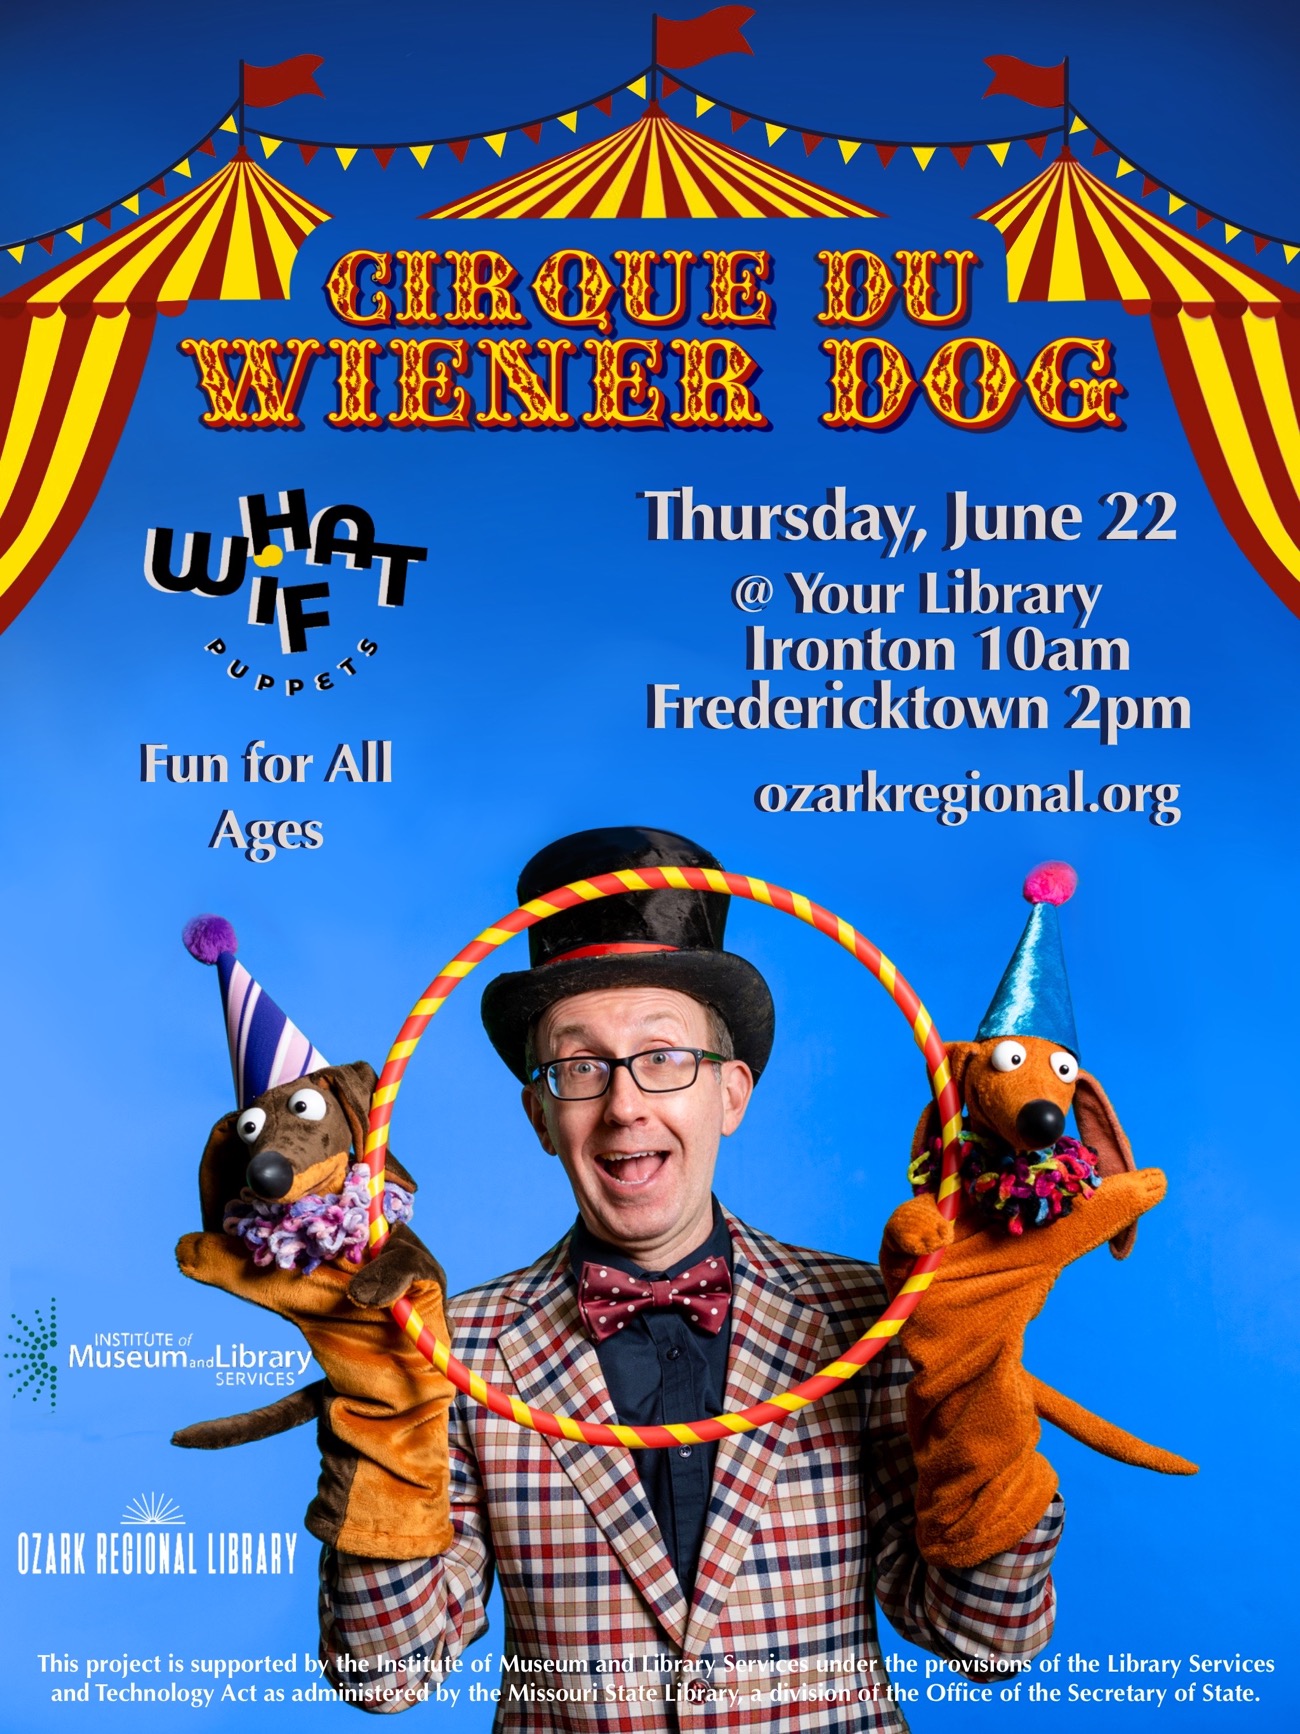 Cirque du Wiener Dog Flyer Fun for All Ages
Thursday, June 22
@ Your Library
Ironton 10am
Fredericktown 2pm
ozarkregional.org
